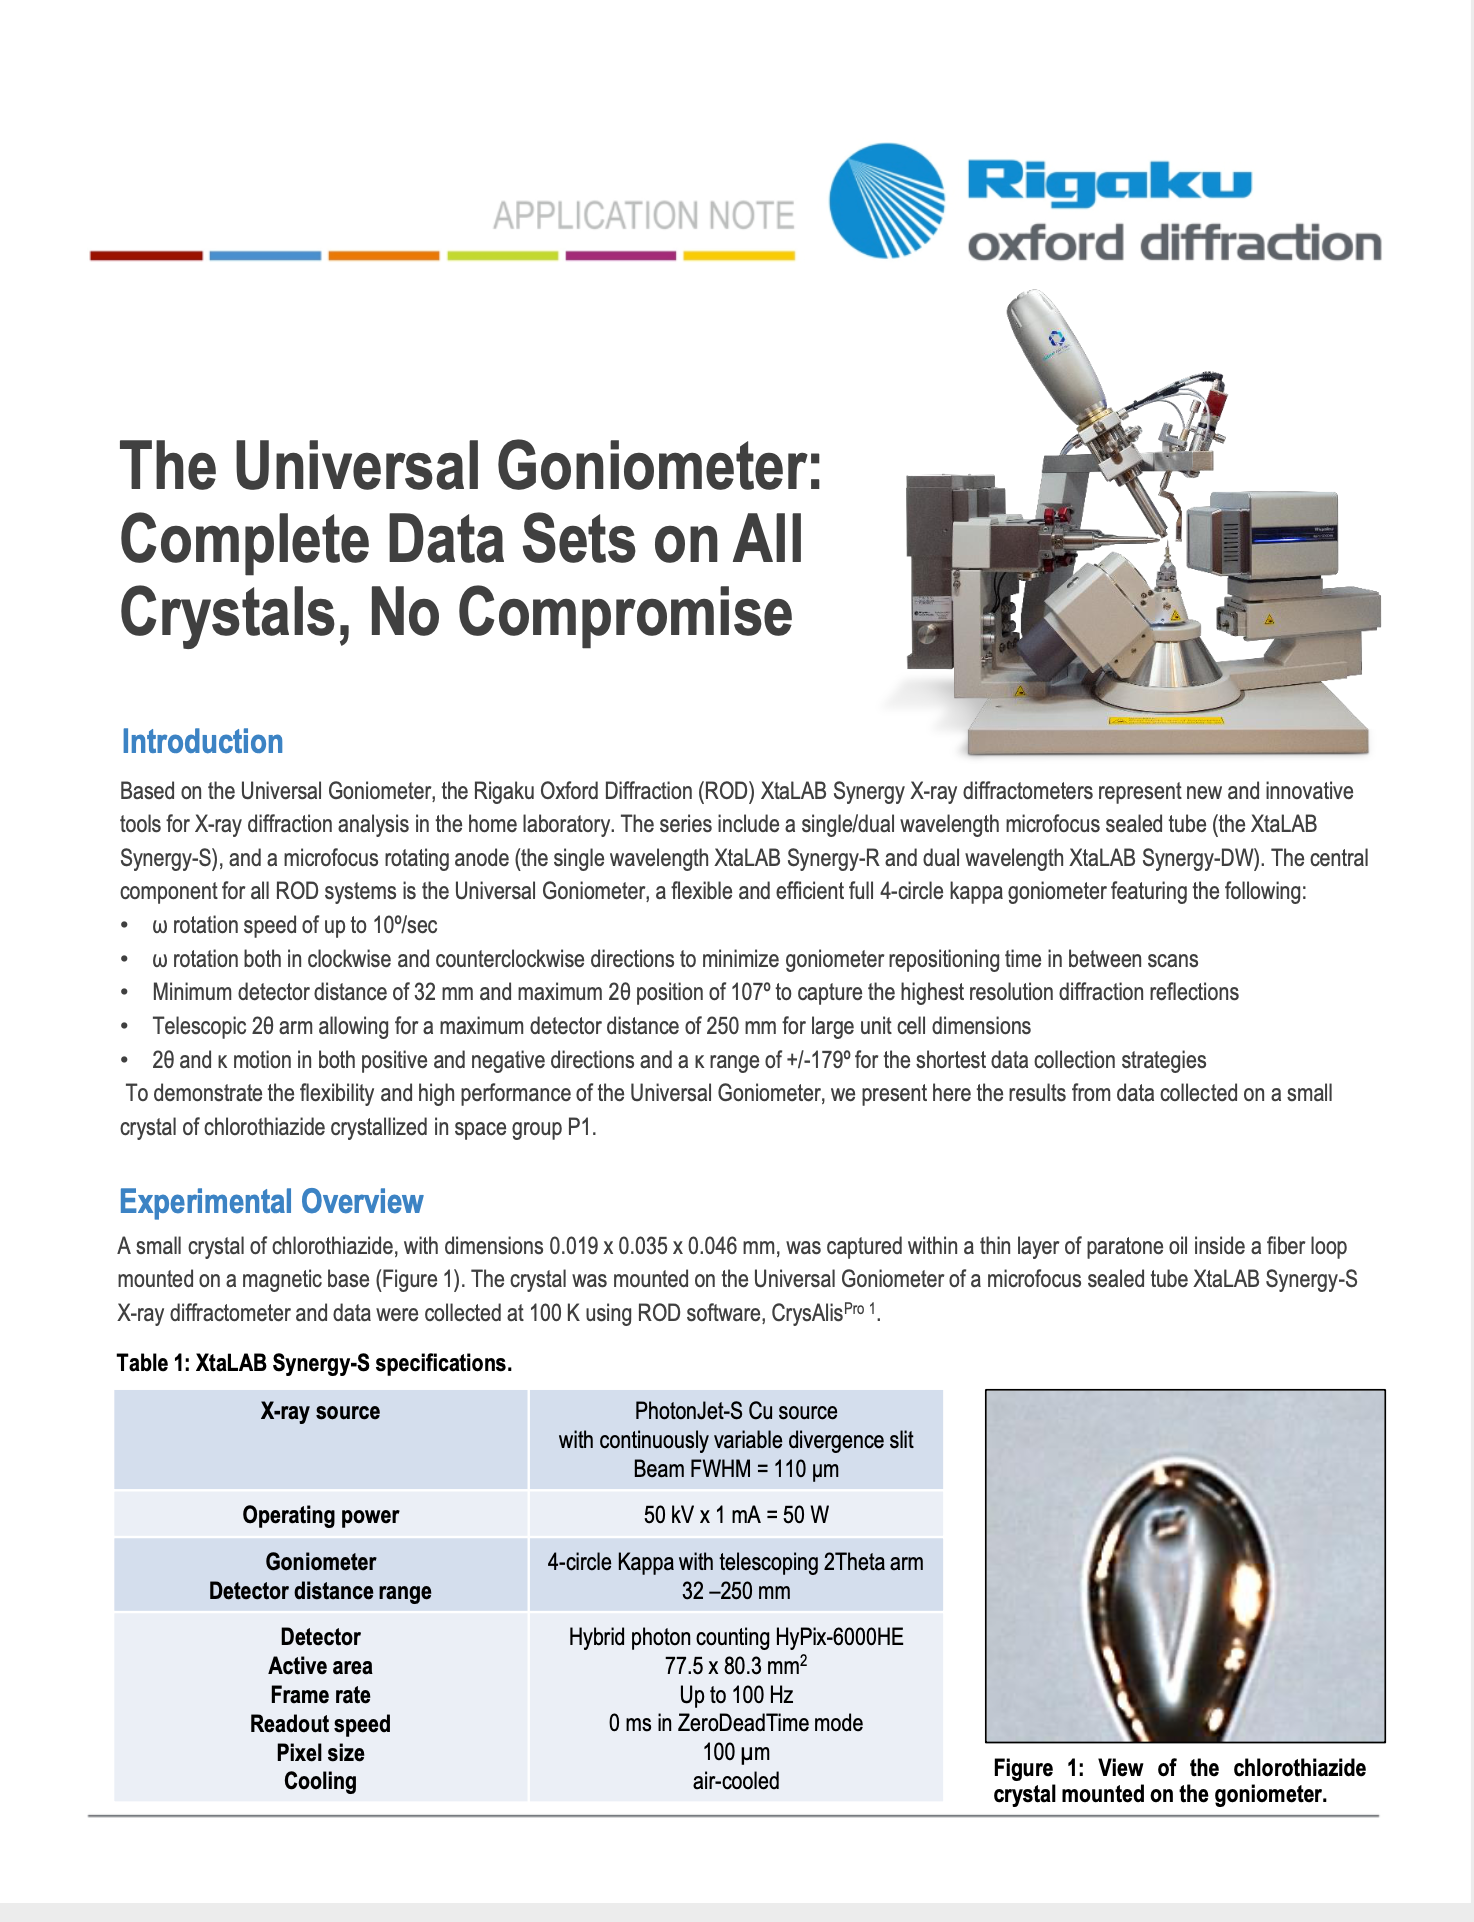 The Universal Goniometer: Complete Data Sets on All Crystals, No Compromise